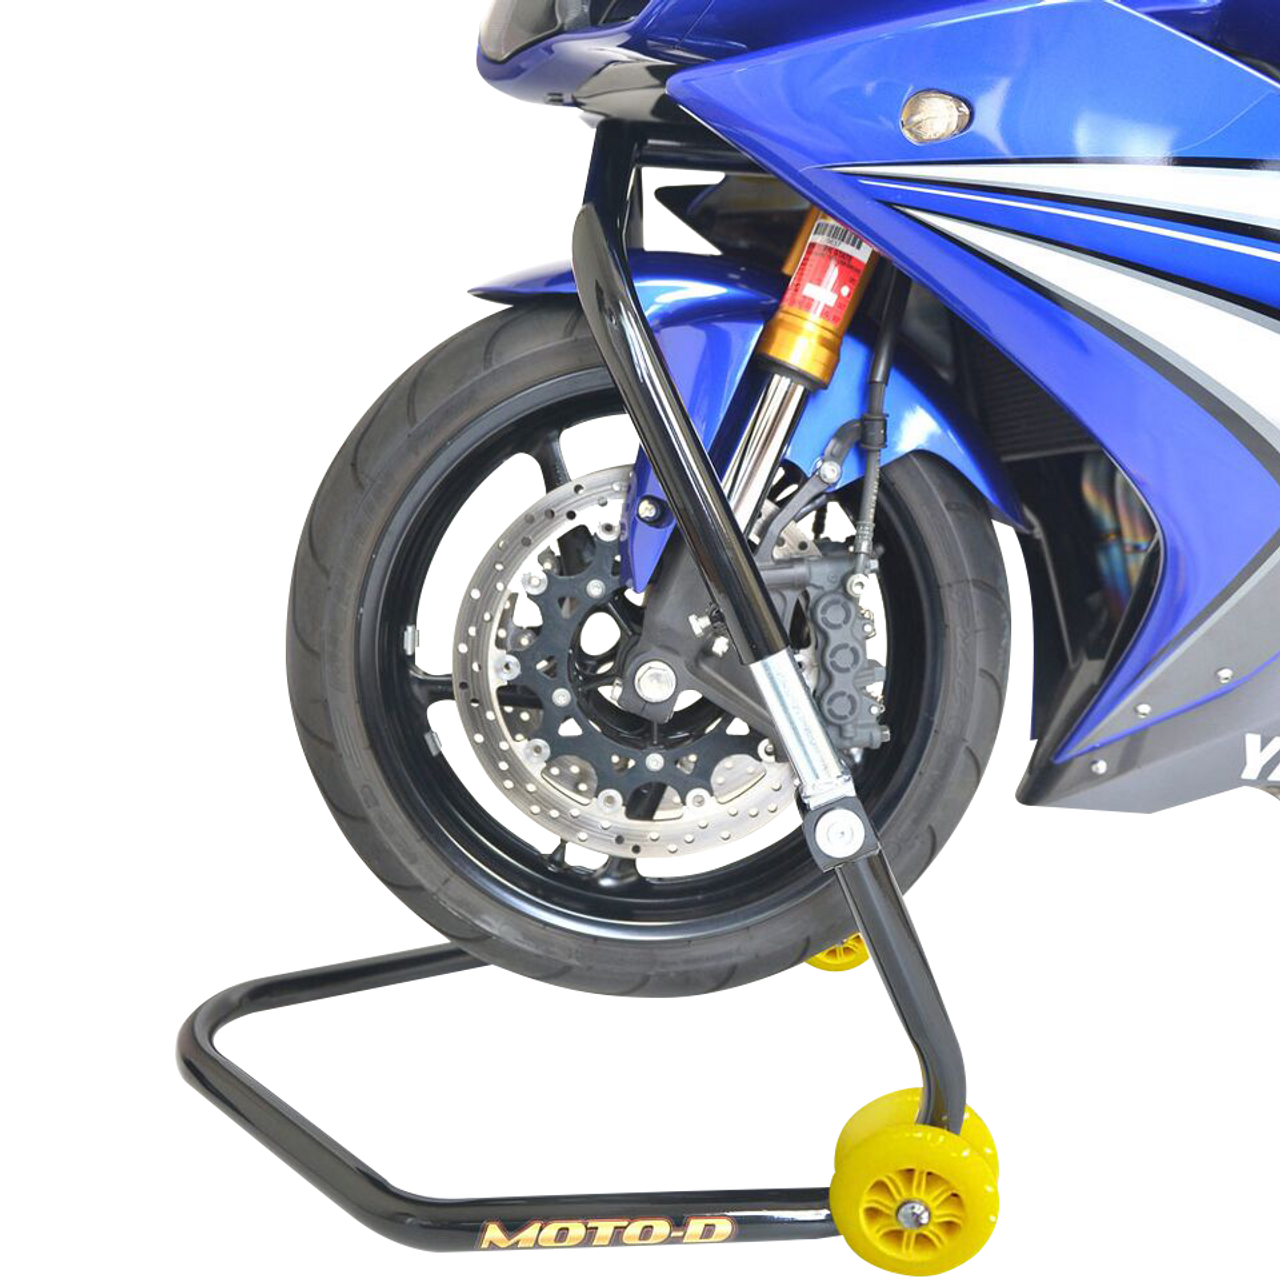 motorcycle front png